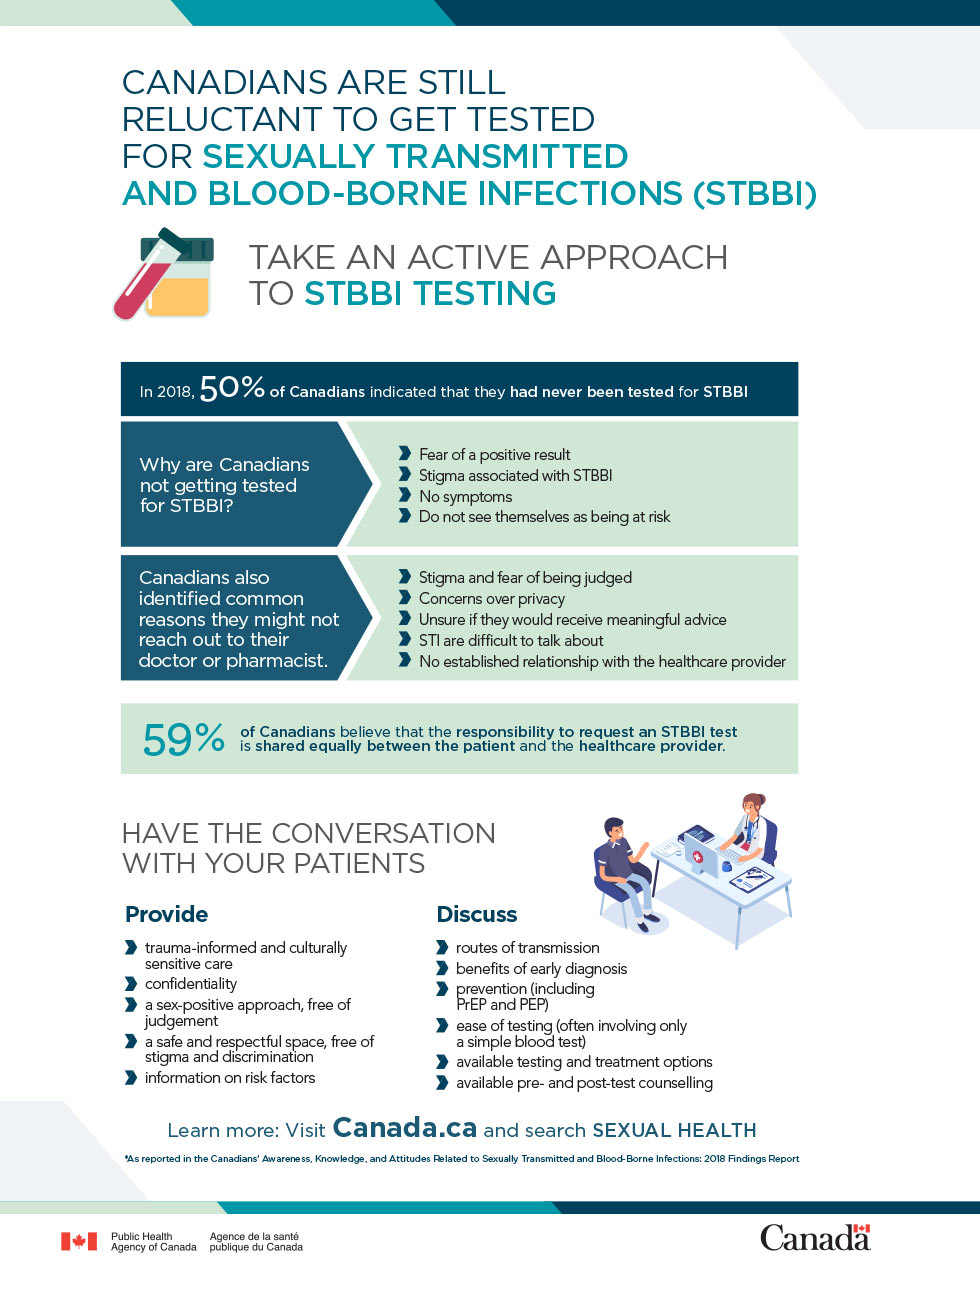 Canadians are still reluctant to get tested for sexually transmitted and blood-borne infections (STBBI)